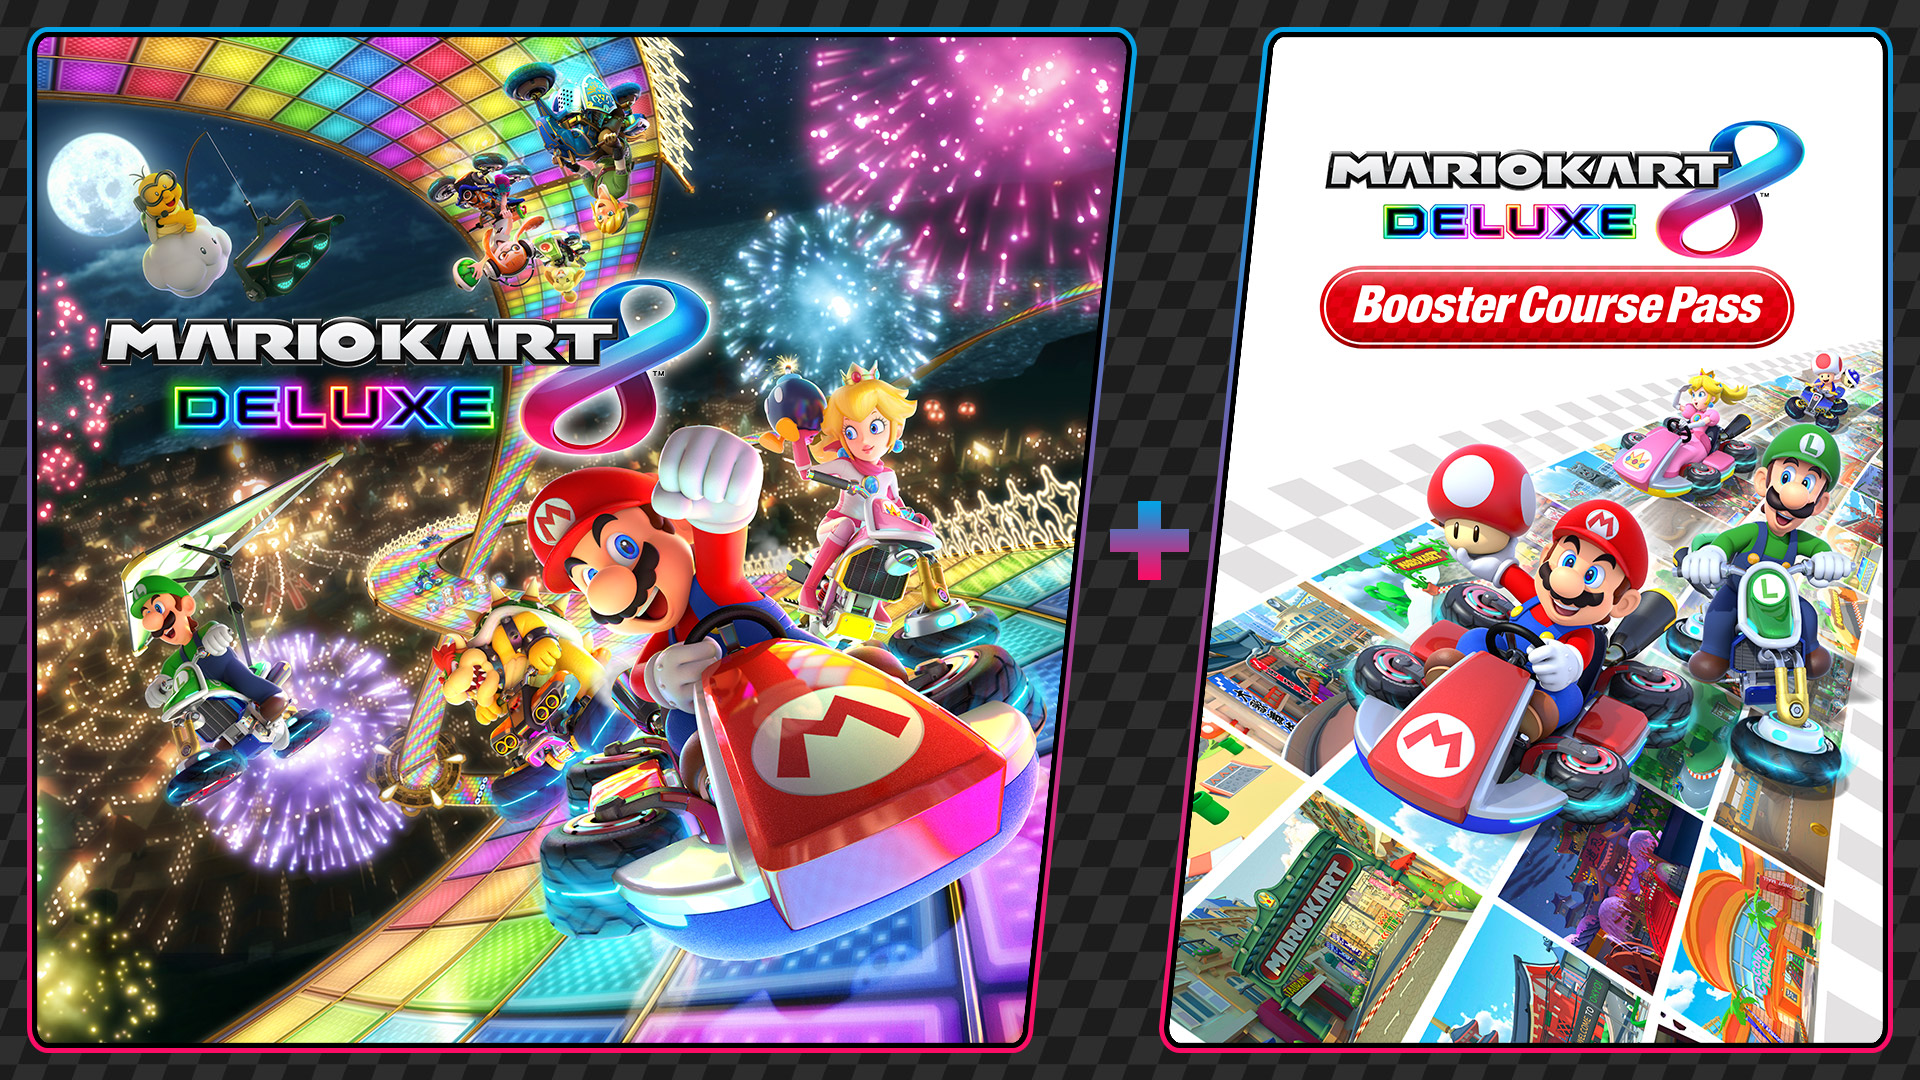 Mario Kart 8 Deluxe - Booster Course Pass Wave 6 - Course Overview 